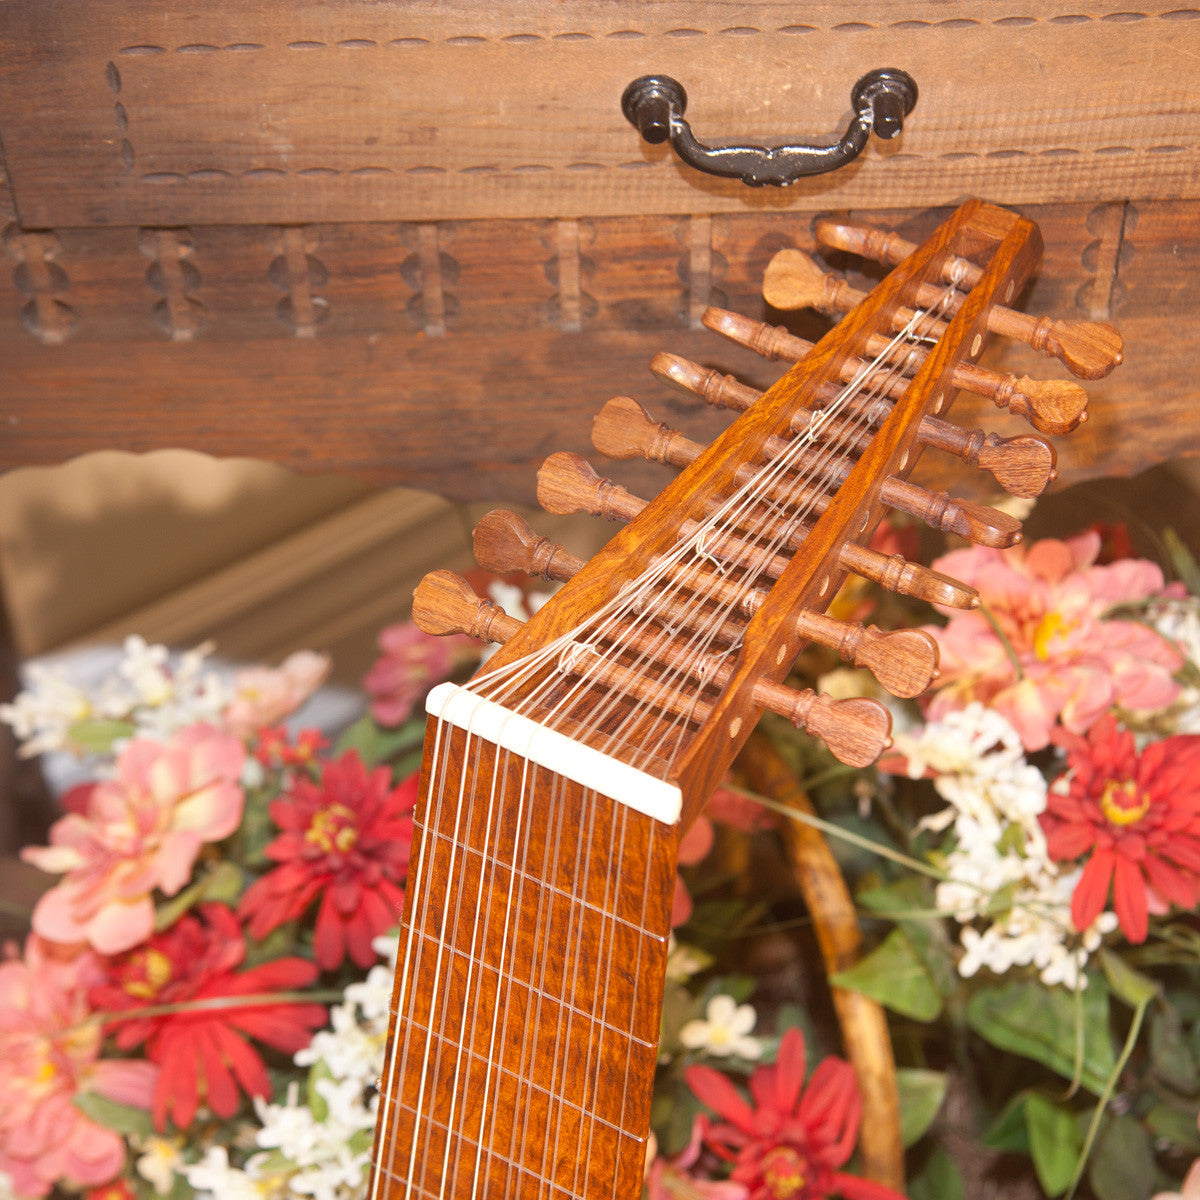 Roosebeck 8-Course Lute Sheesham & Canadian Spruce Lutes Roosebeck   